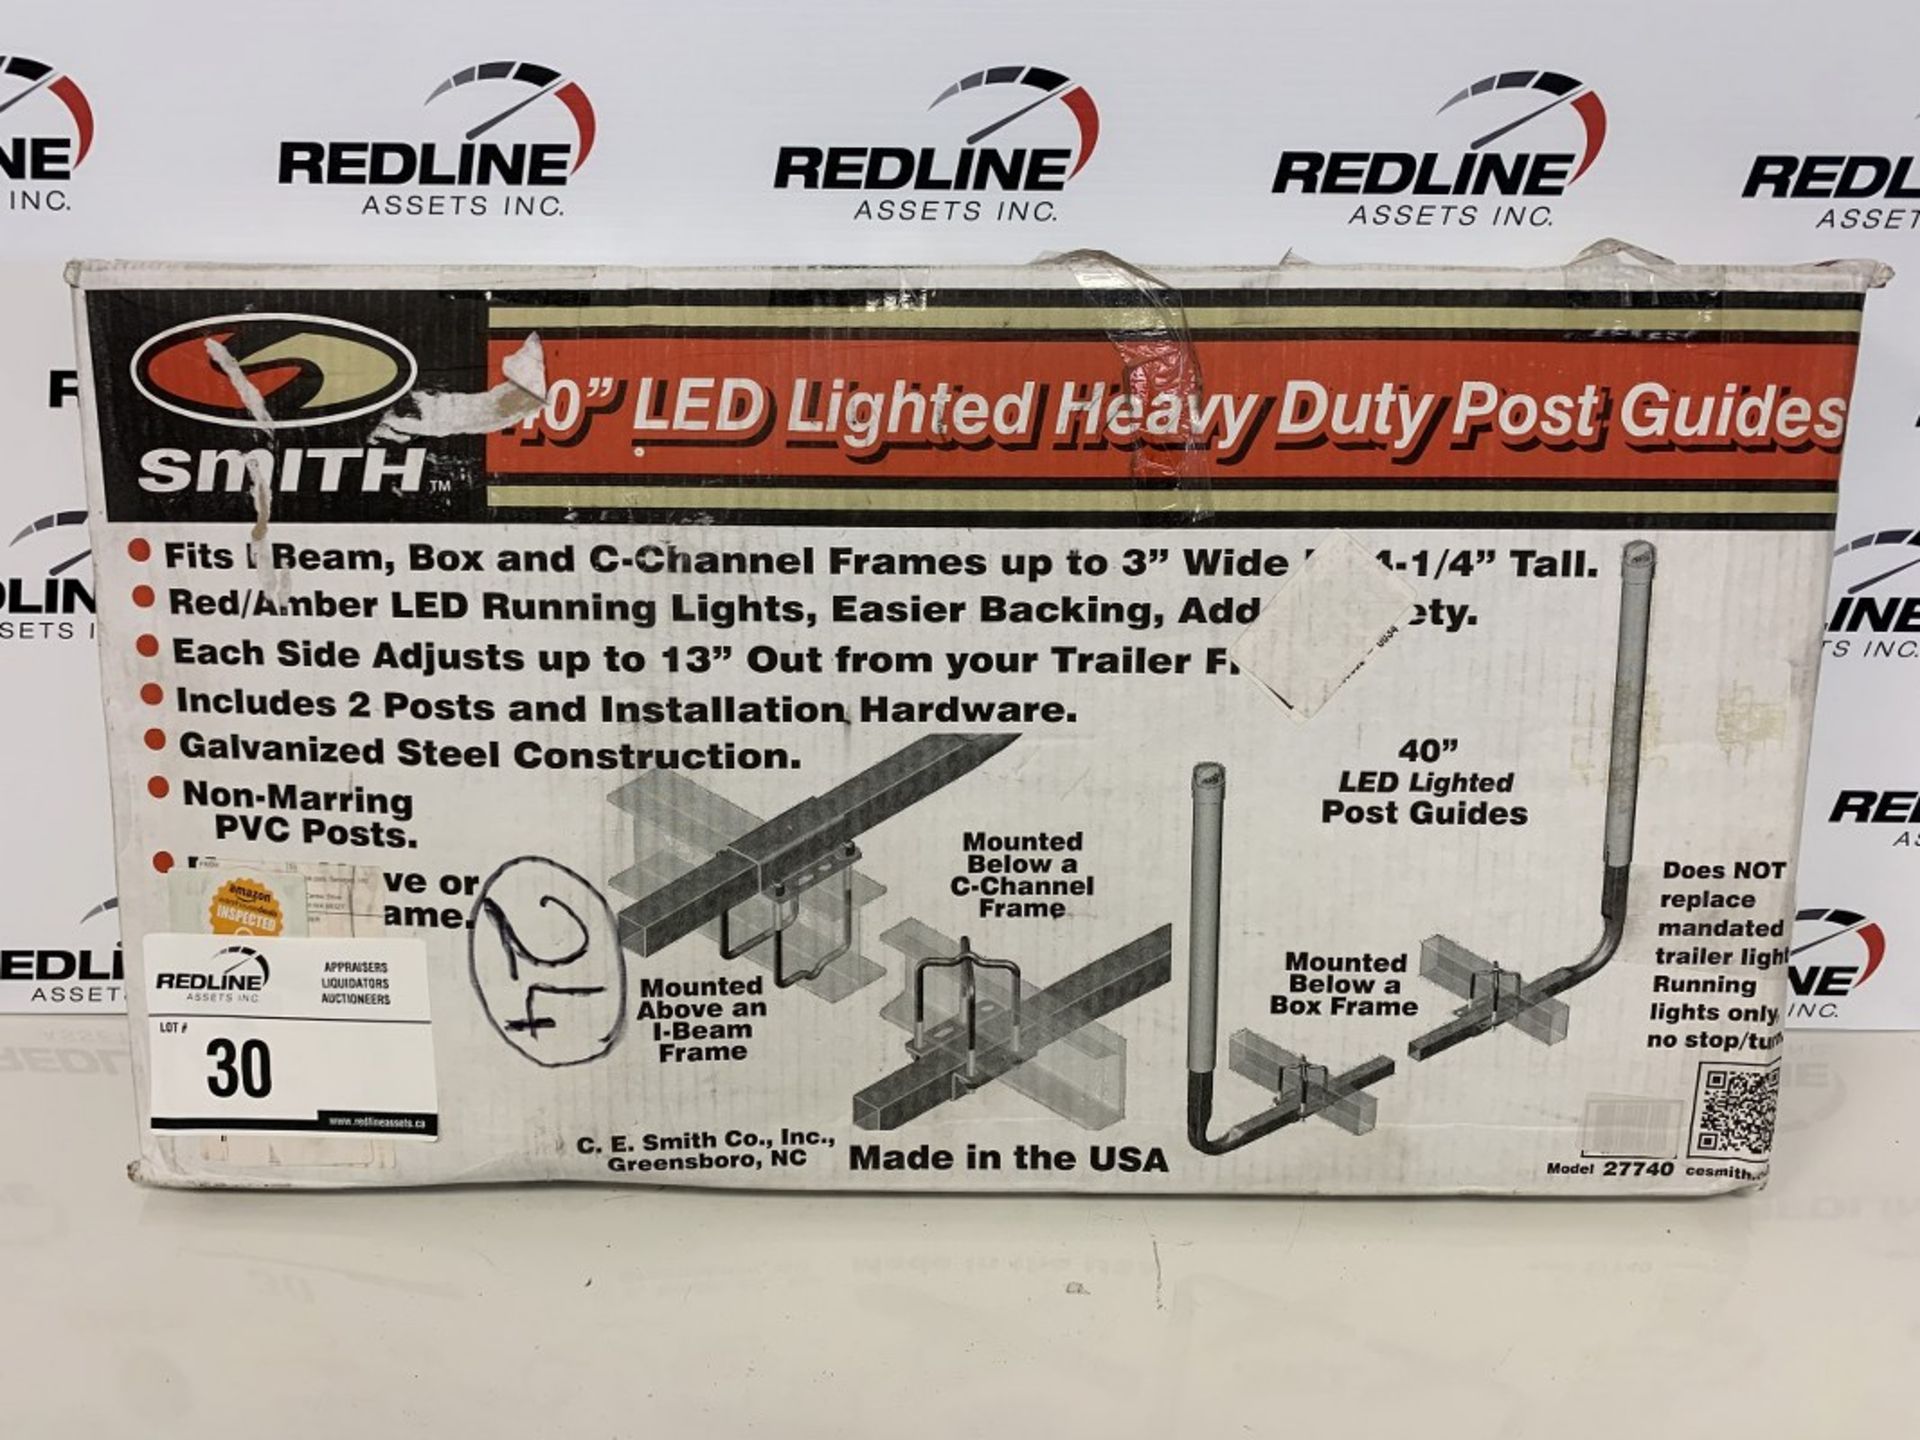 Smith - 10" Led Lighted Heavy Duty Post Guides